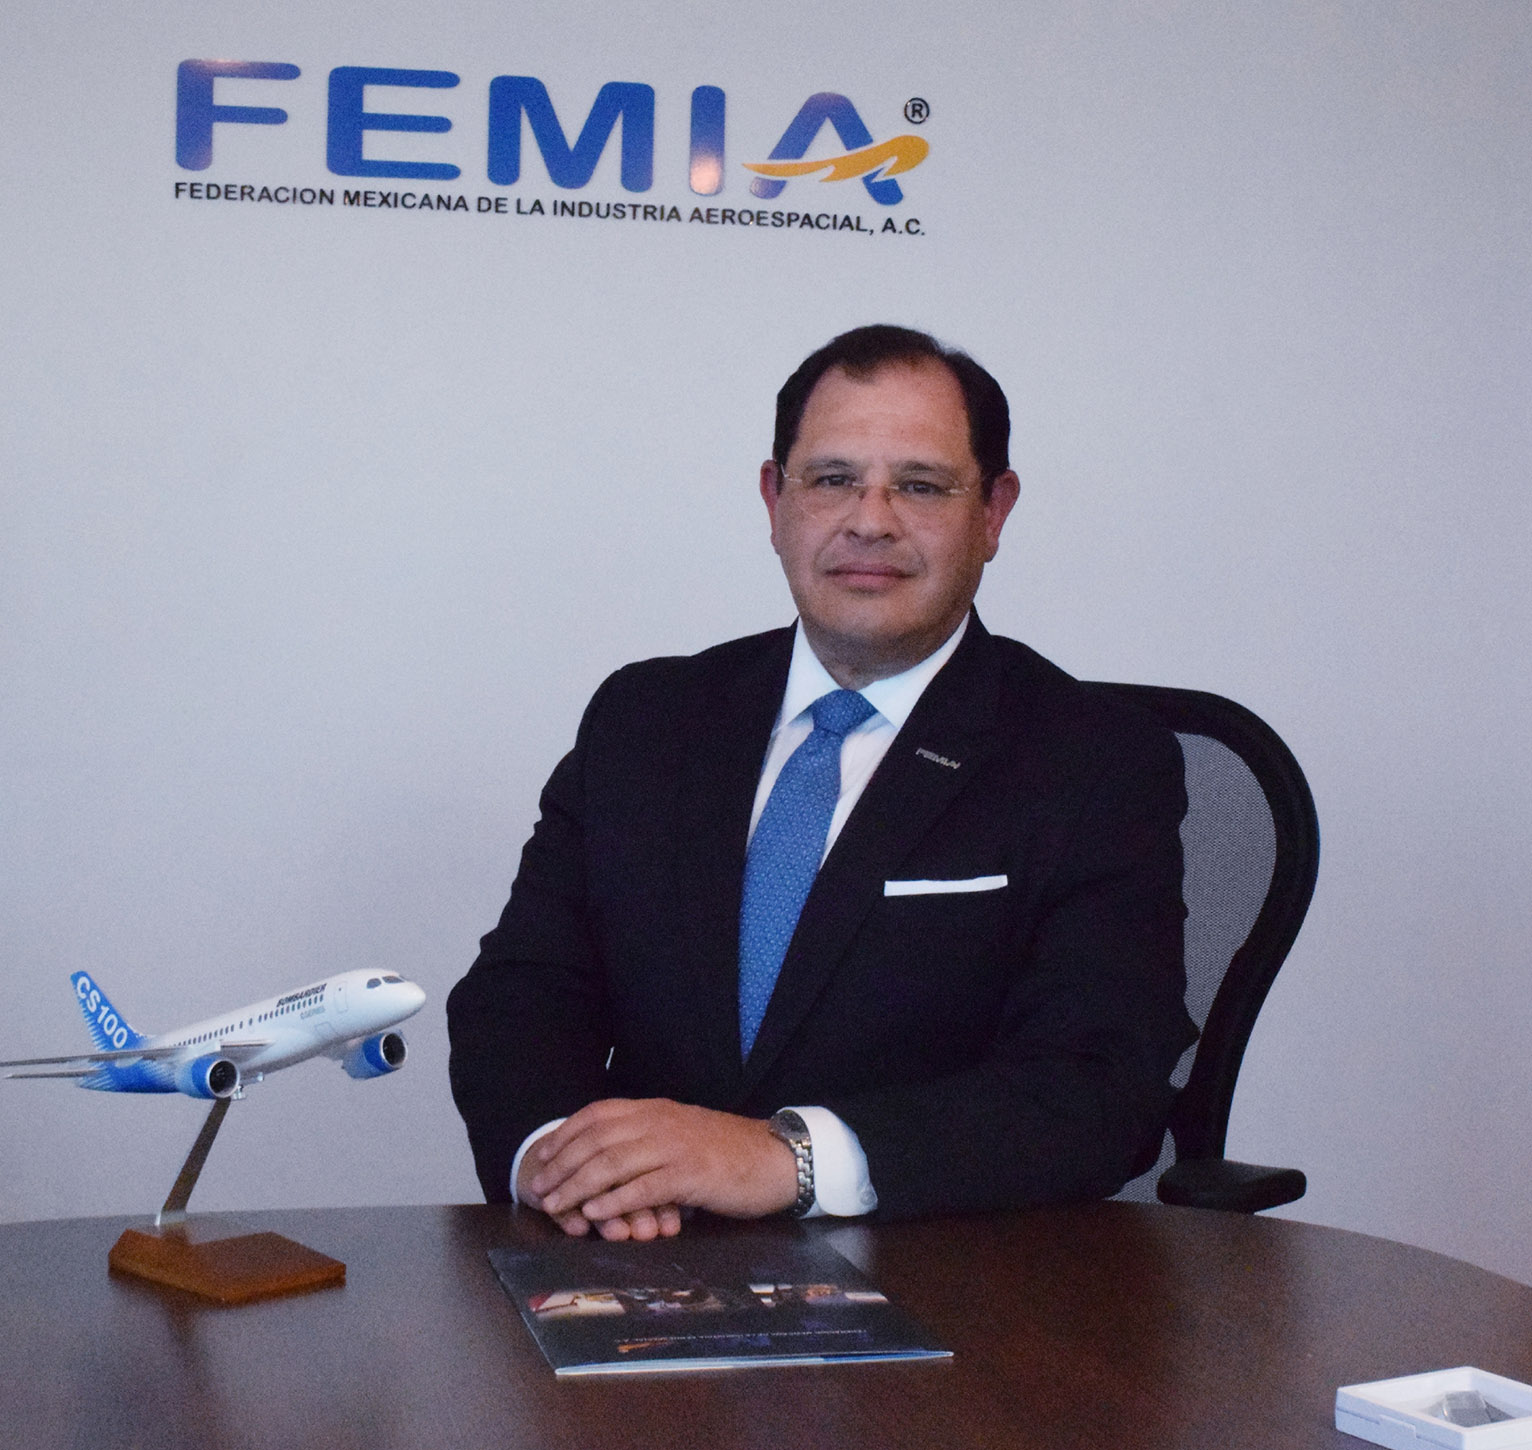 FEMIA and the AEM are willing to attract investments in the Mexican space industry